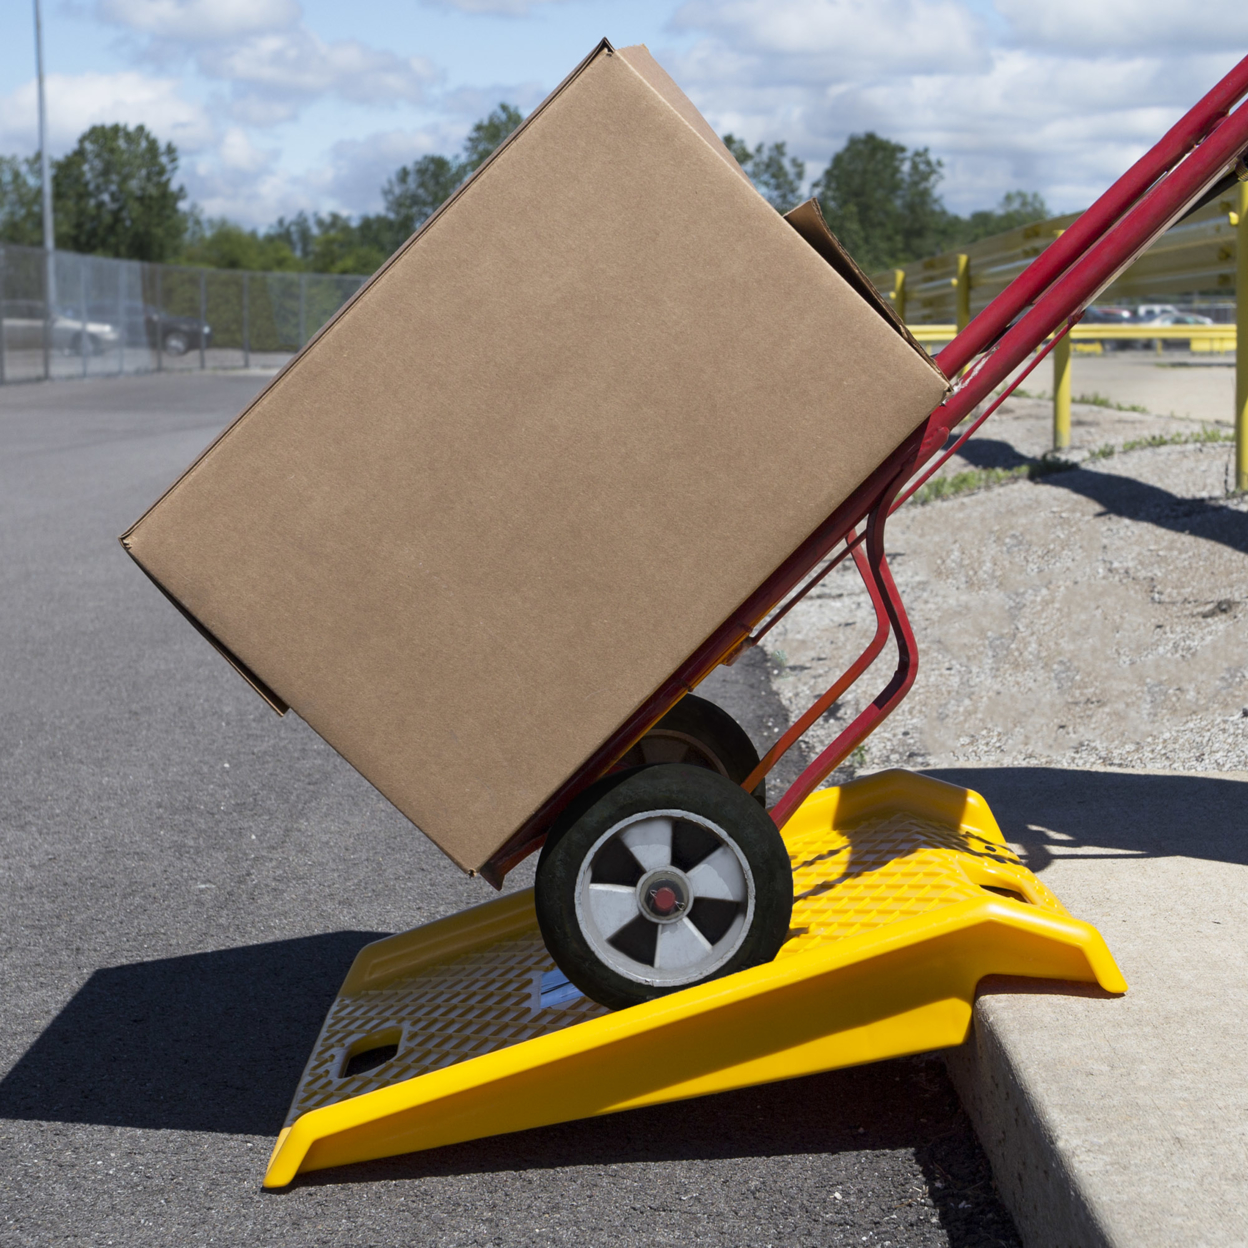 Curb Ramp, Heavy Duty Portable Poly Ramp With 1000 Lbs Weight Capacity